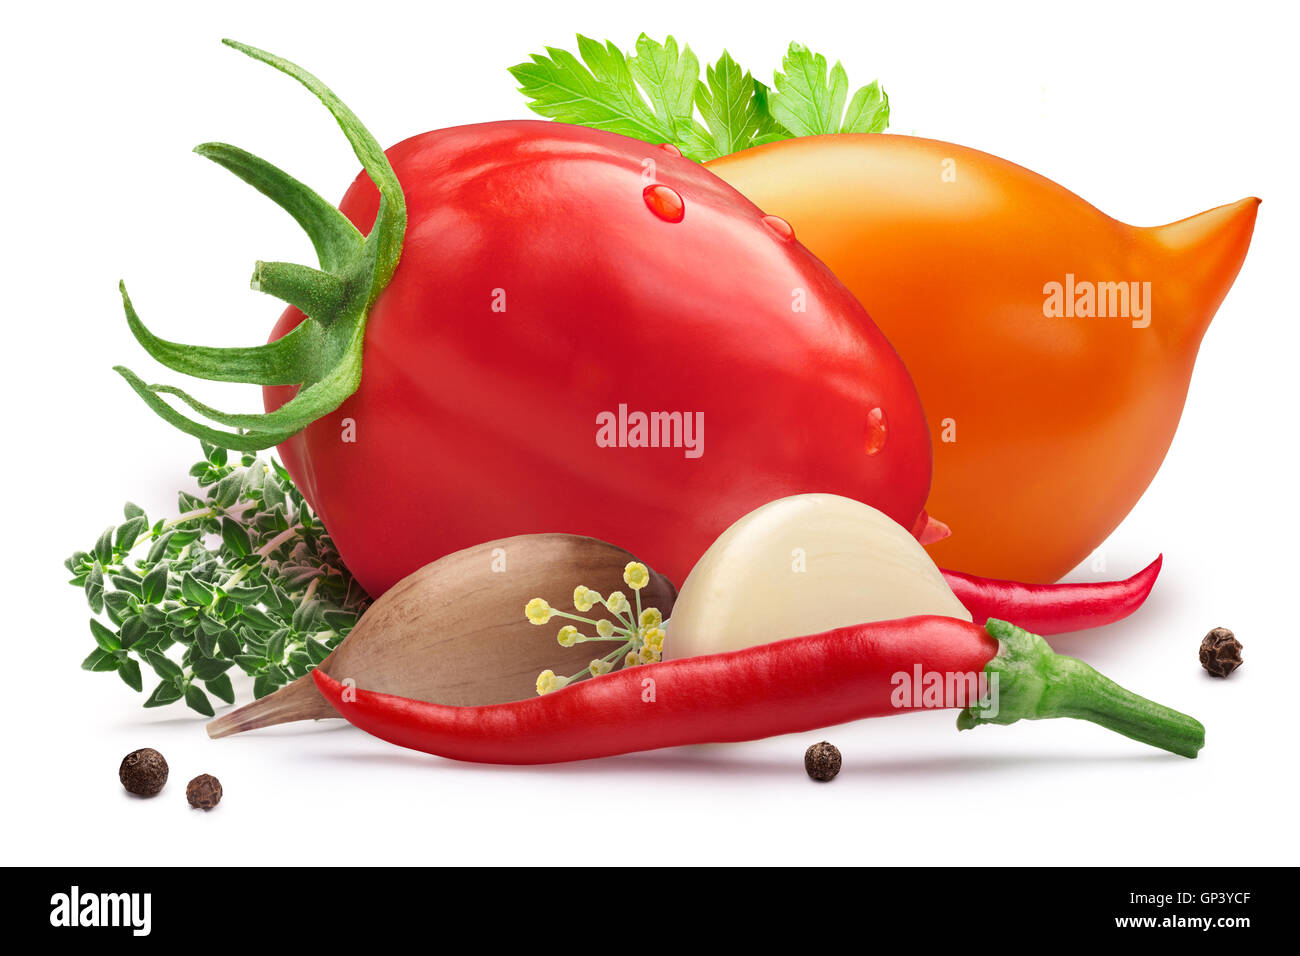 Fresh red and yellow tomatoes for pickling with herbs, chili peppers and garlic. Clipping path, shadow separated. Design element Stock Photo